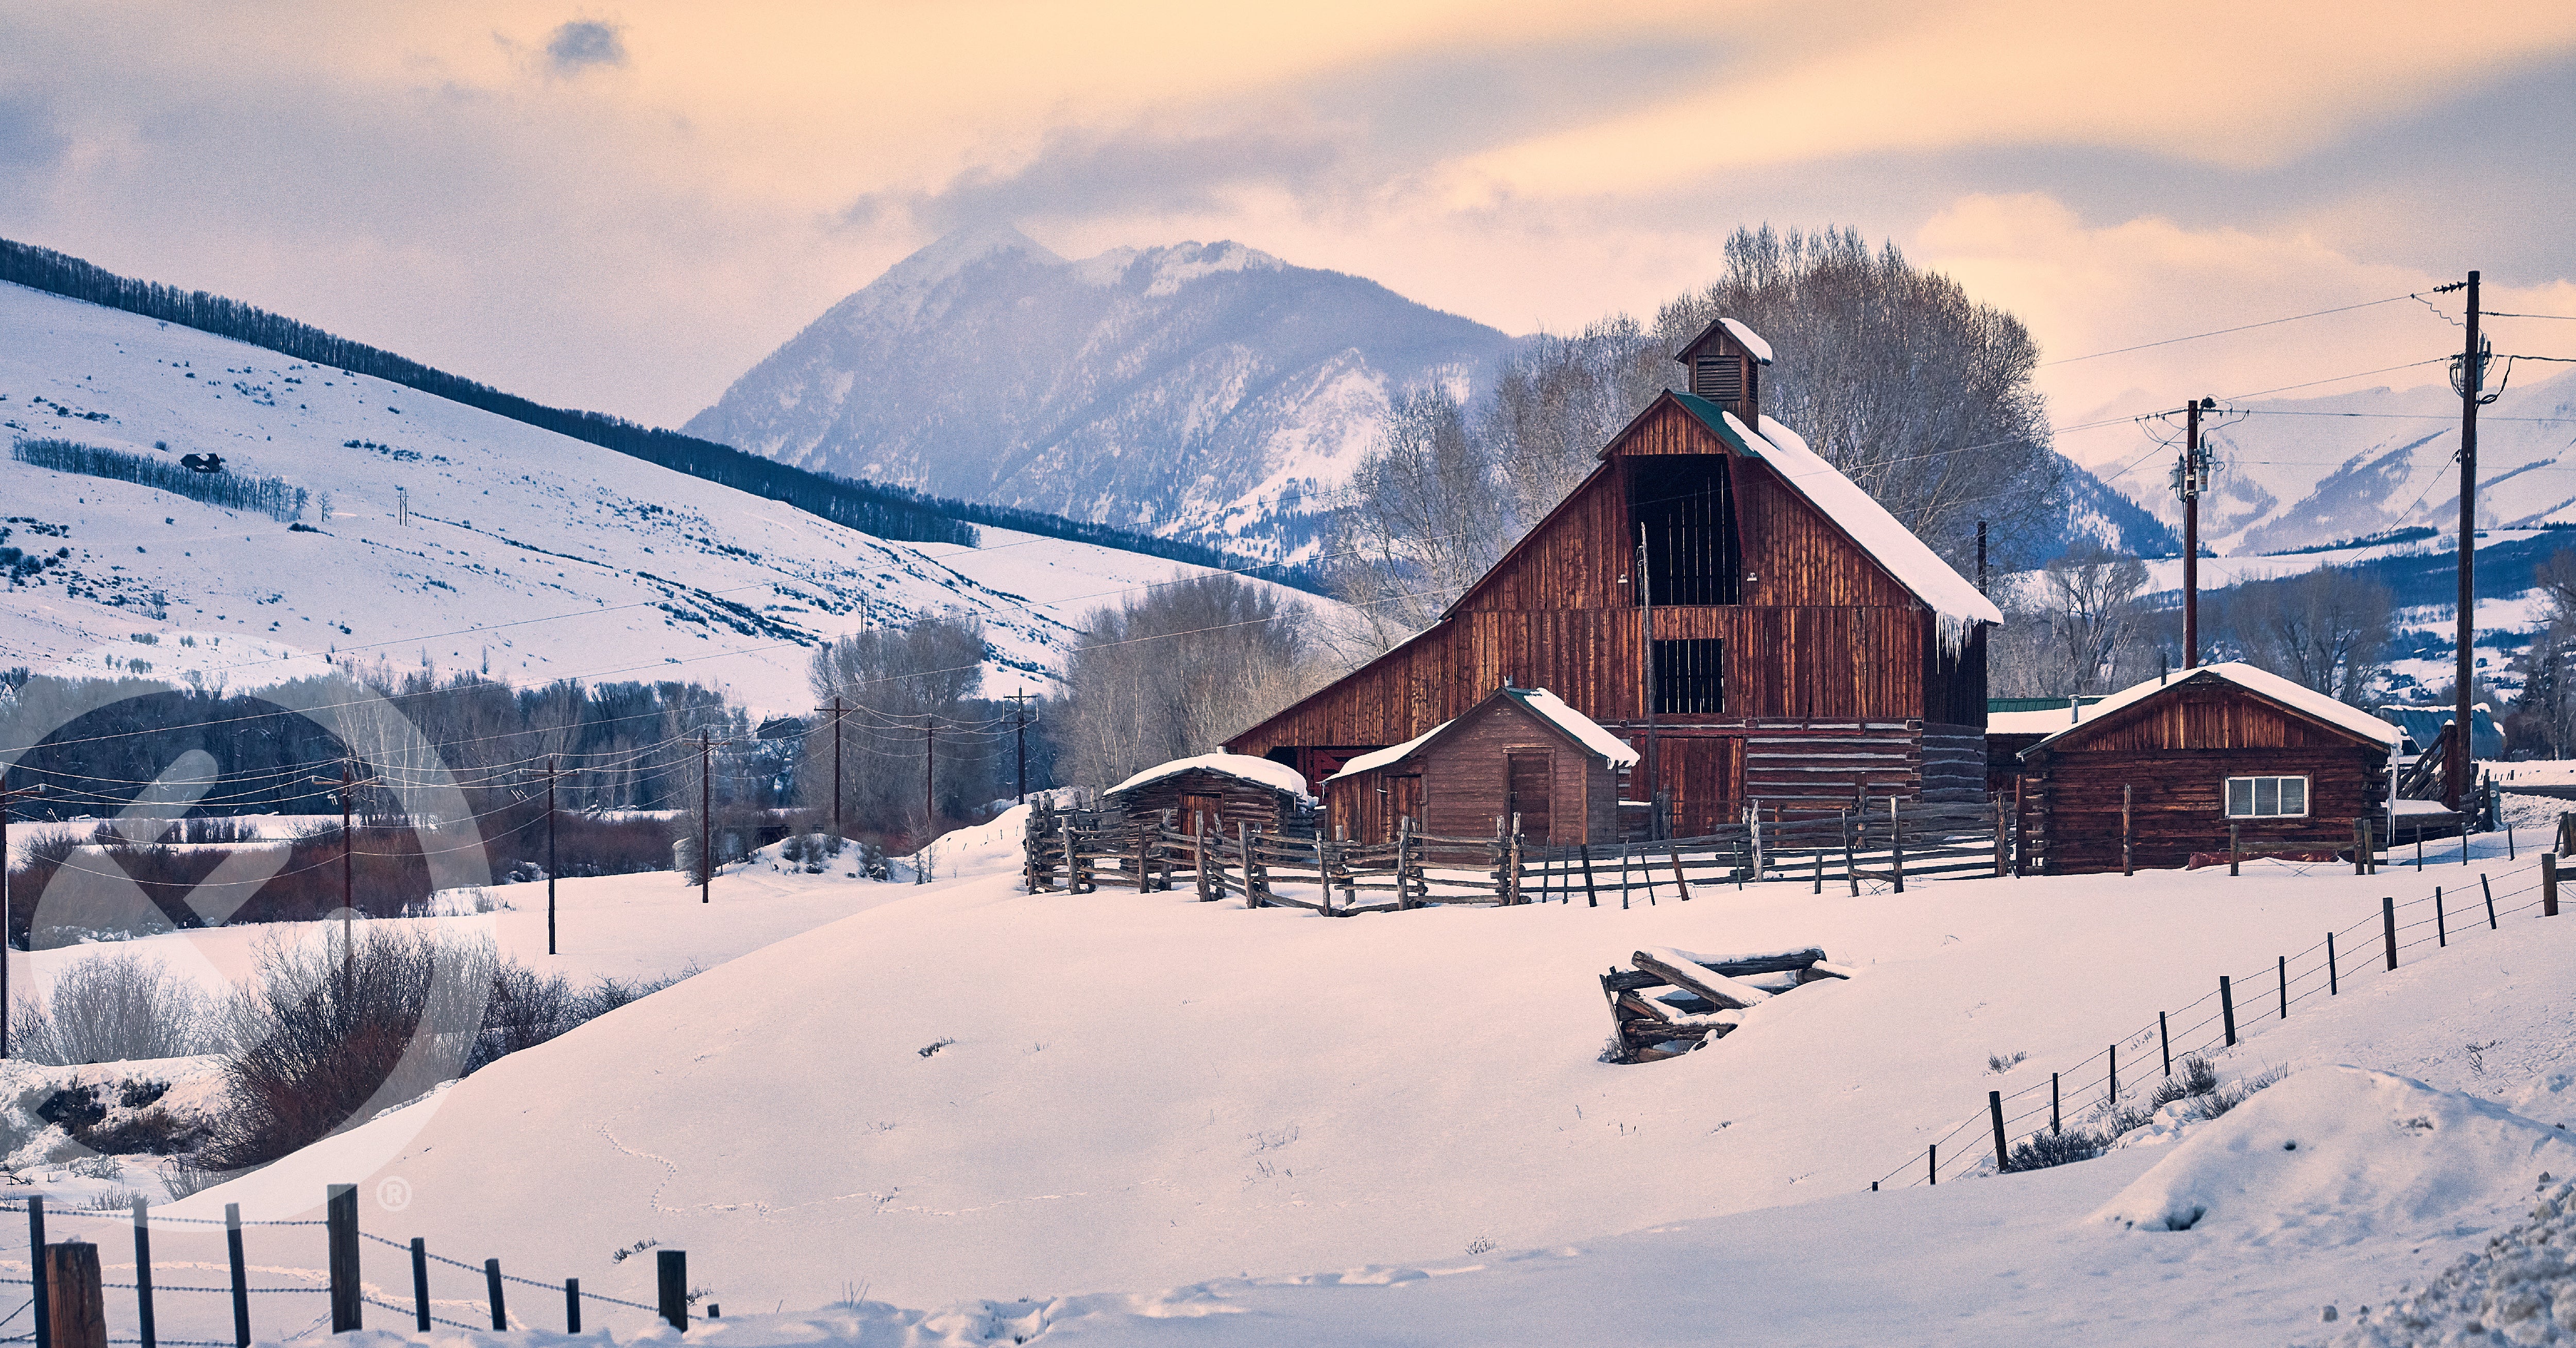 Colorado’s mountain towns featuring energy efficiency